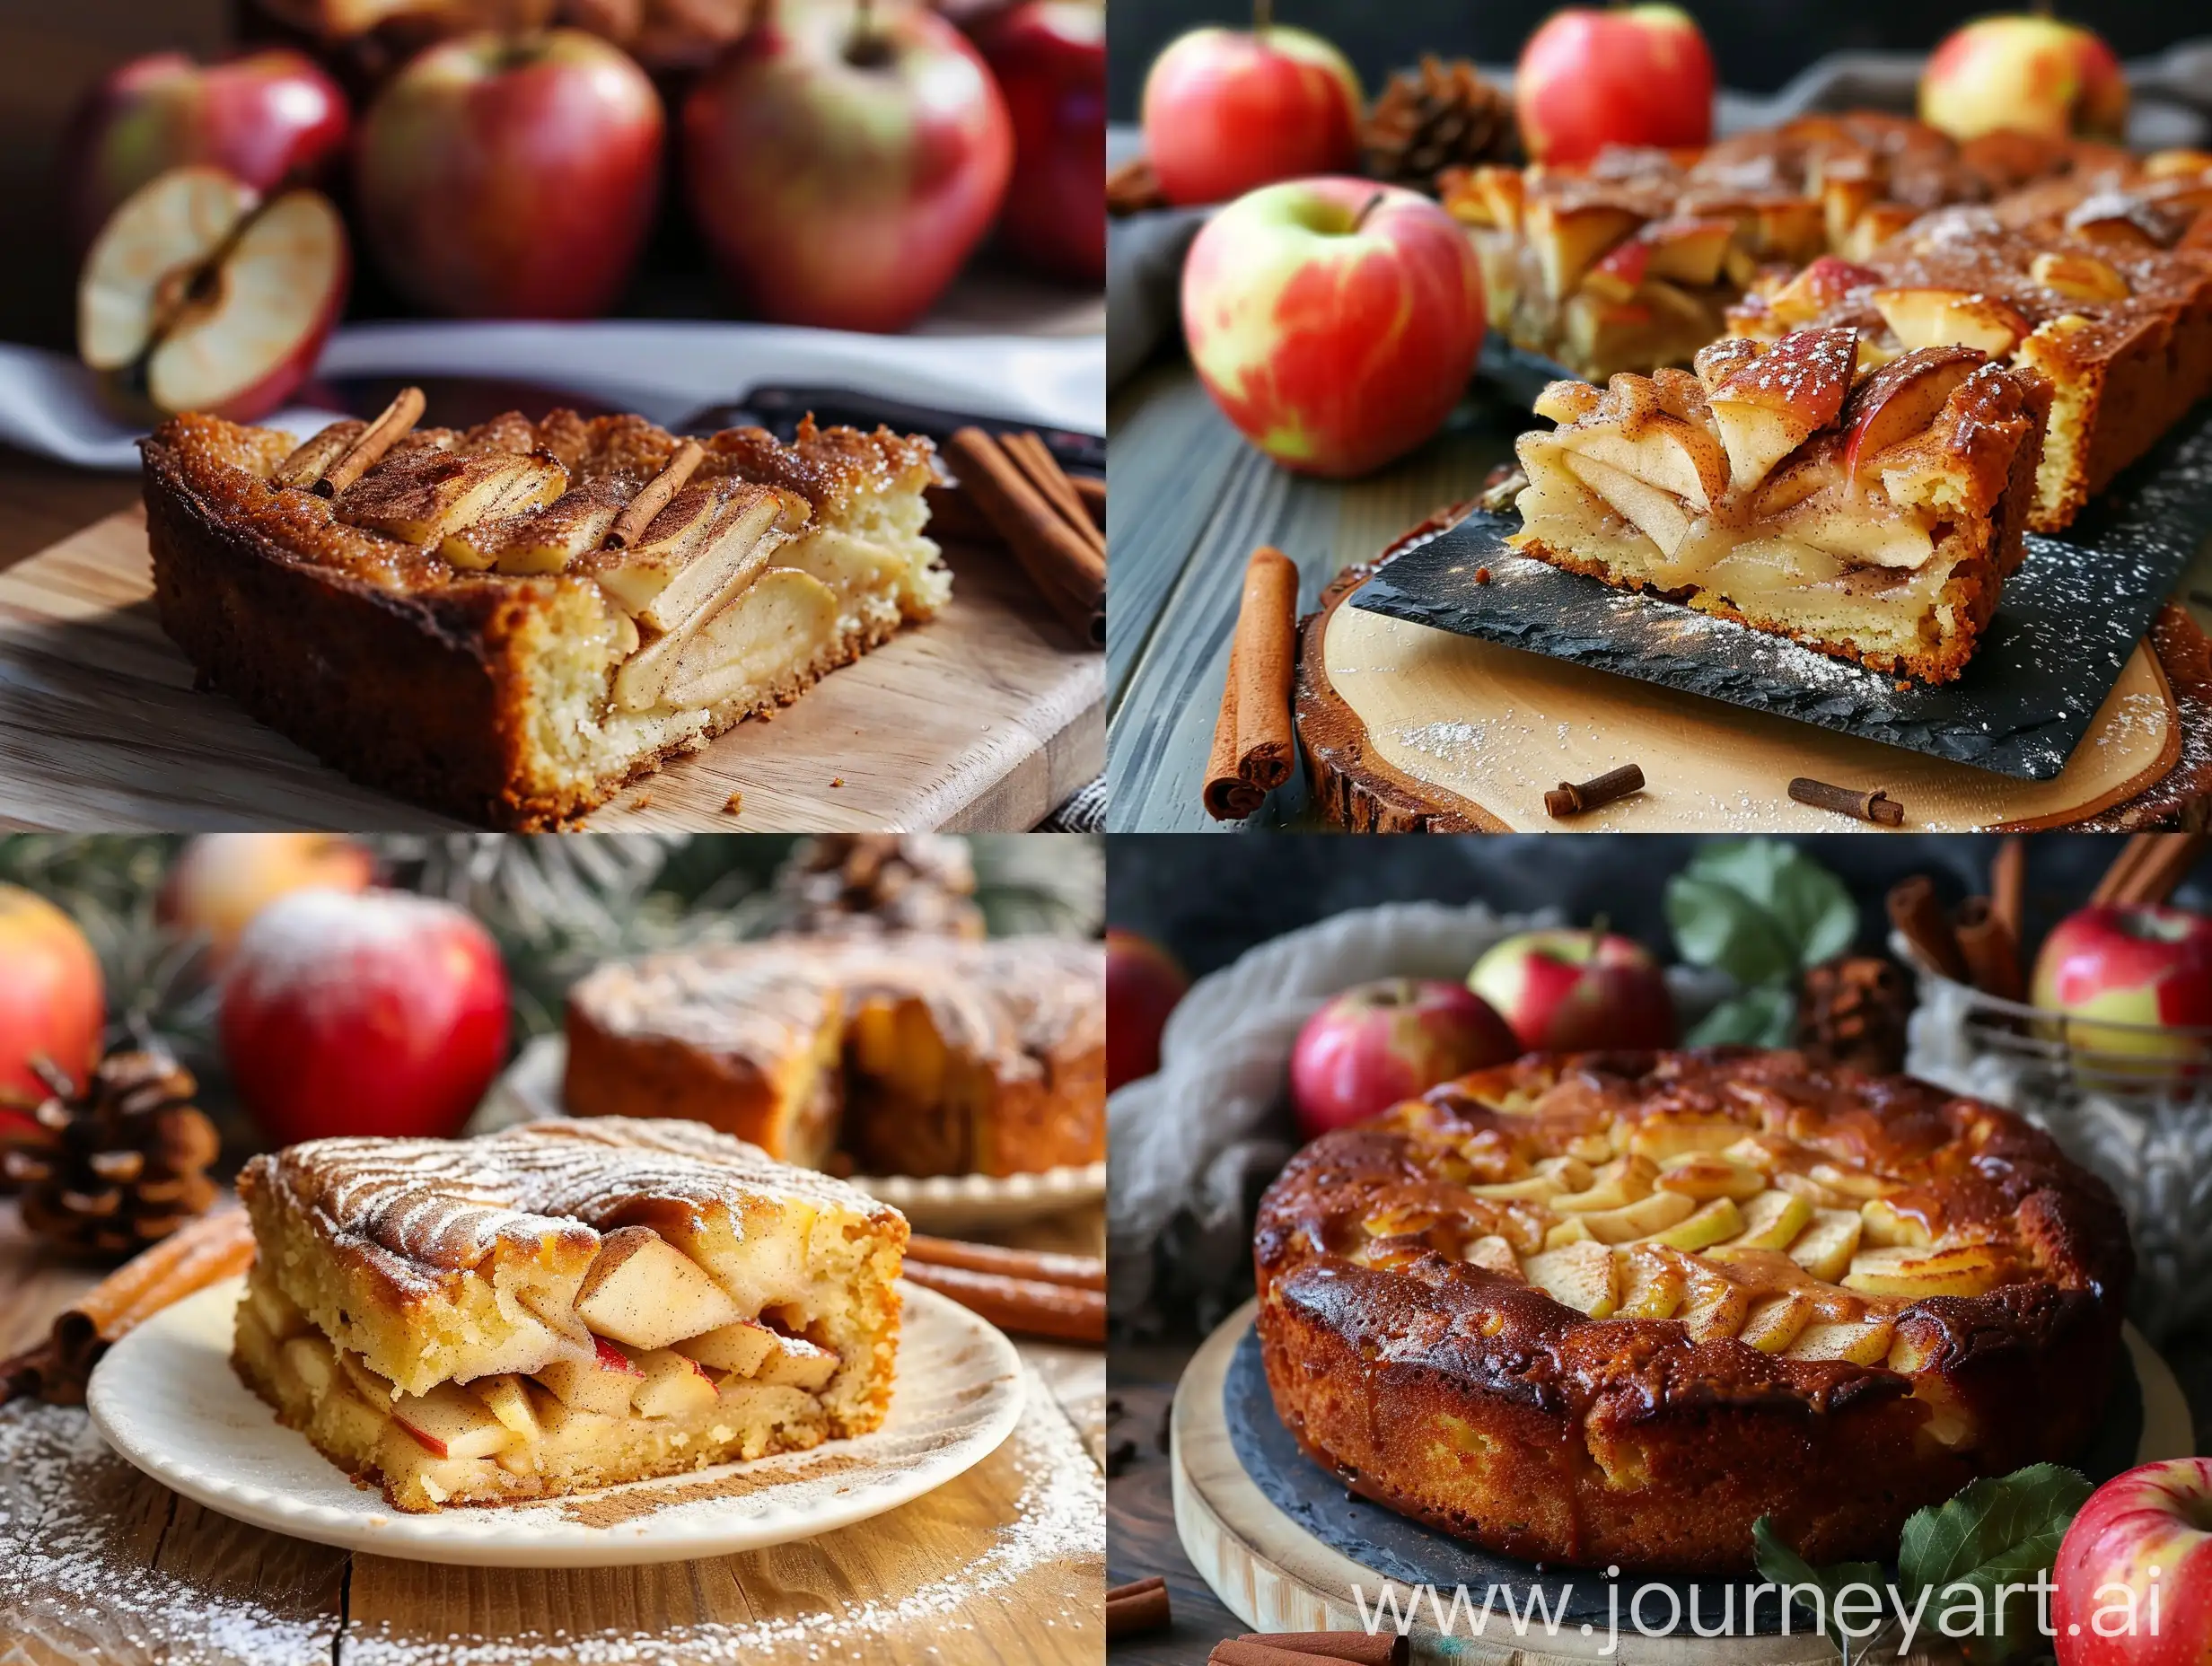 Delicious-Apple-and-Cinnamon-Cake-A-Tempting-Dessert-Treat